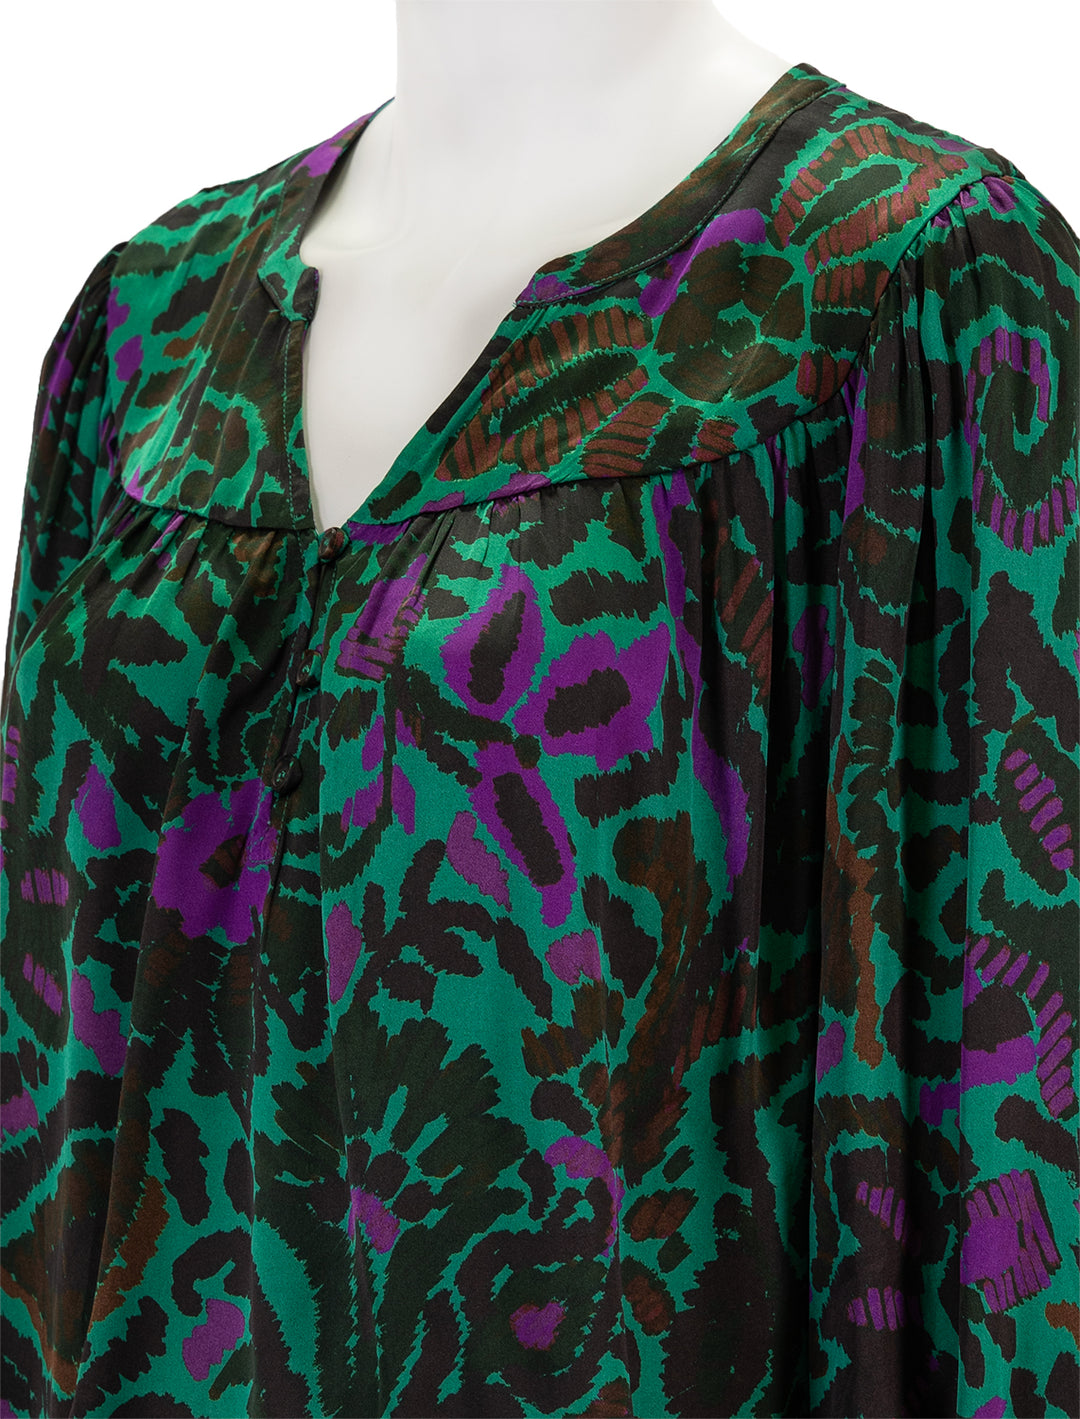 Close-up view of Velvet's reeve blouse in amazon.